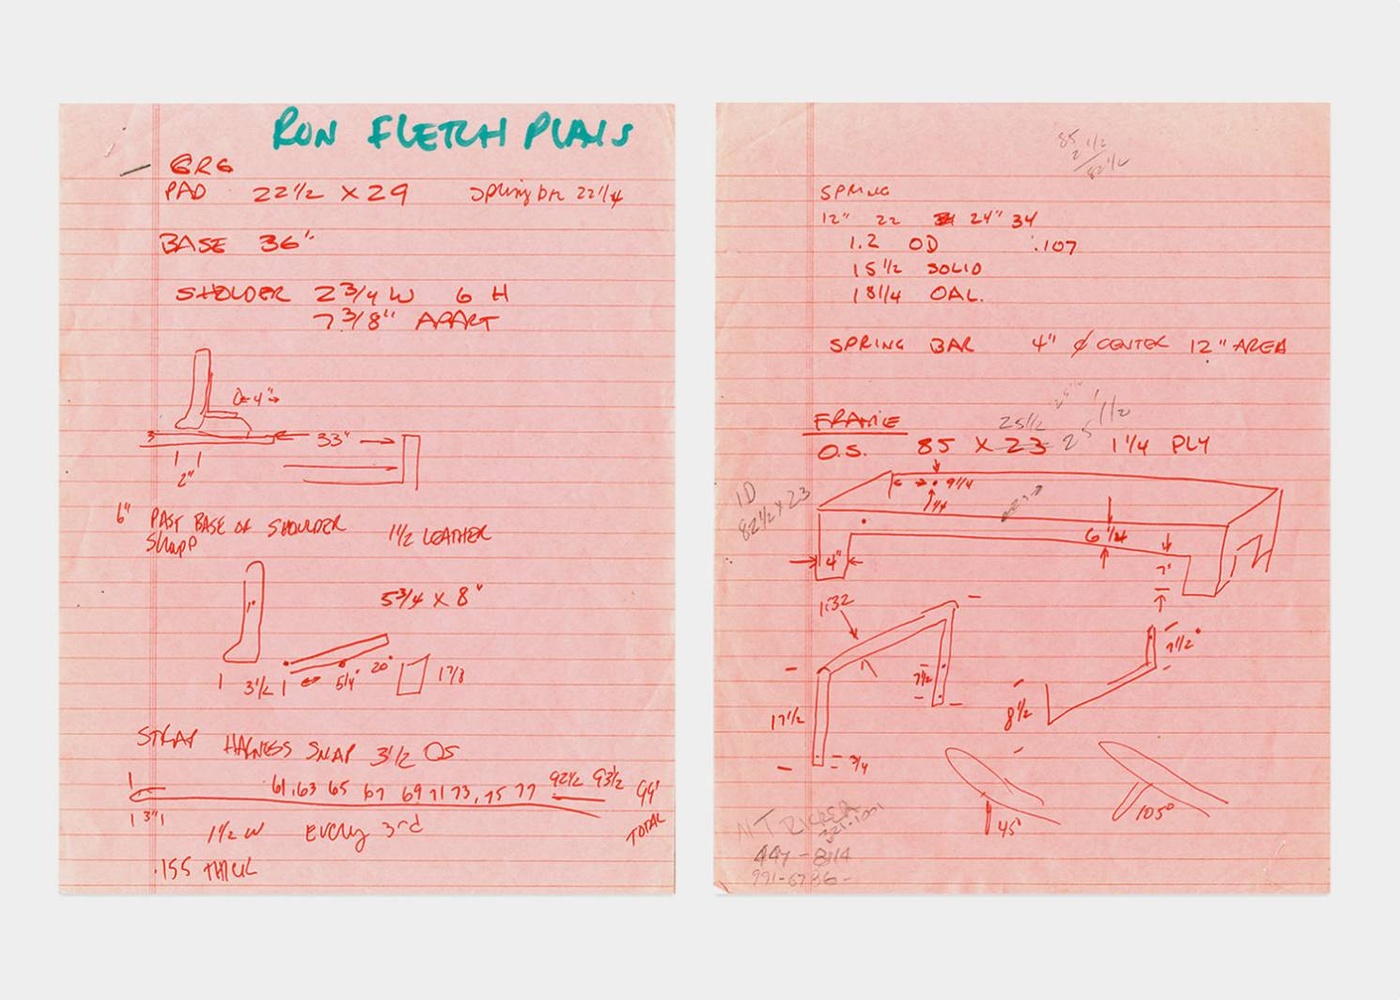 Early Fletcher Reformer notes